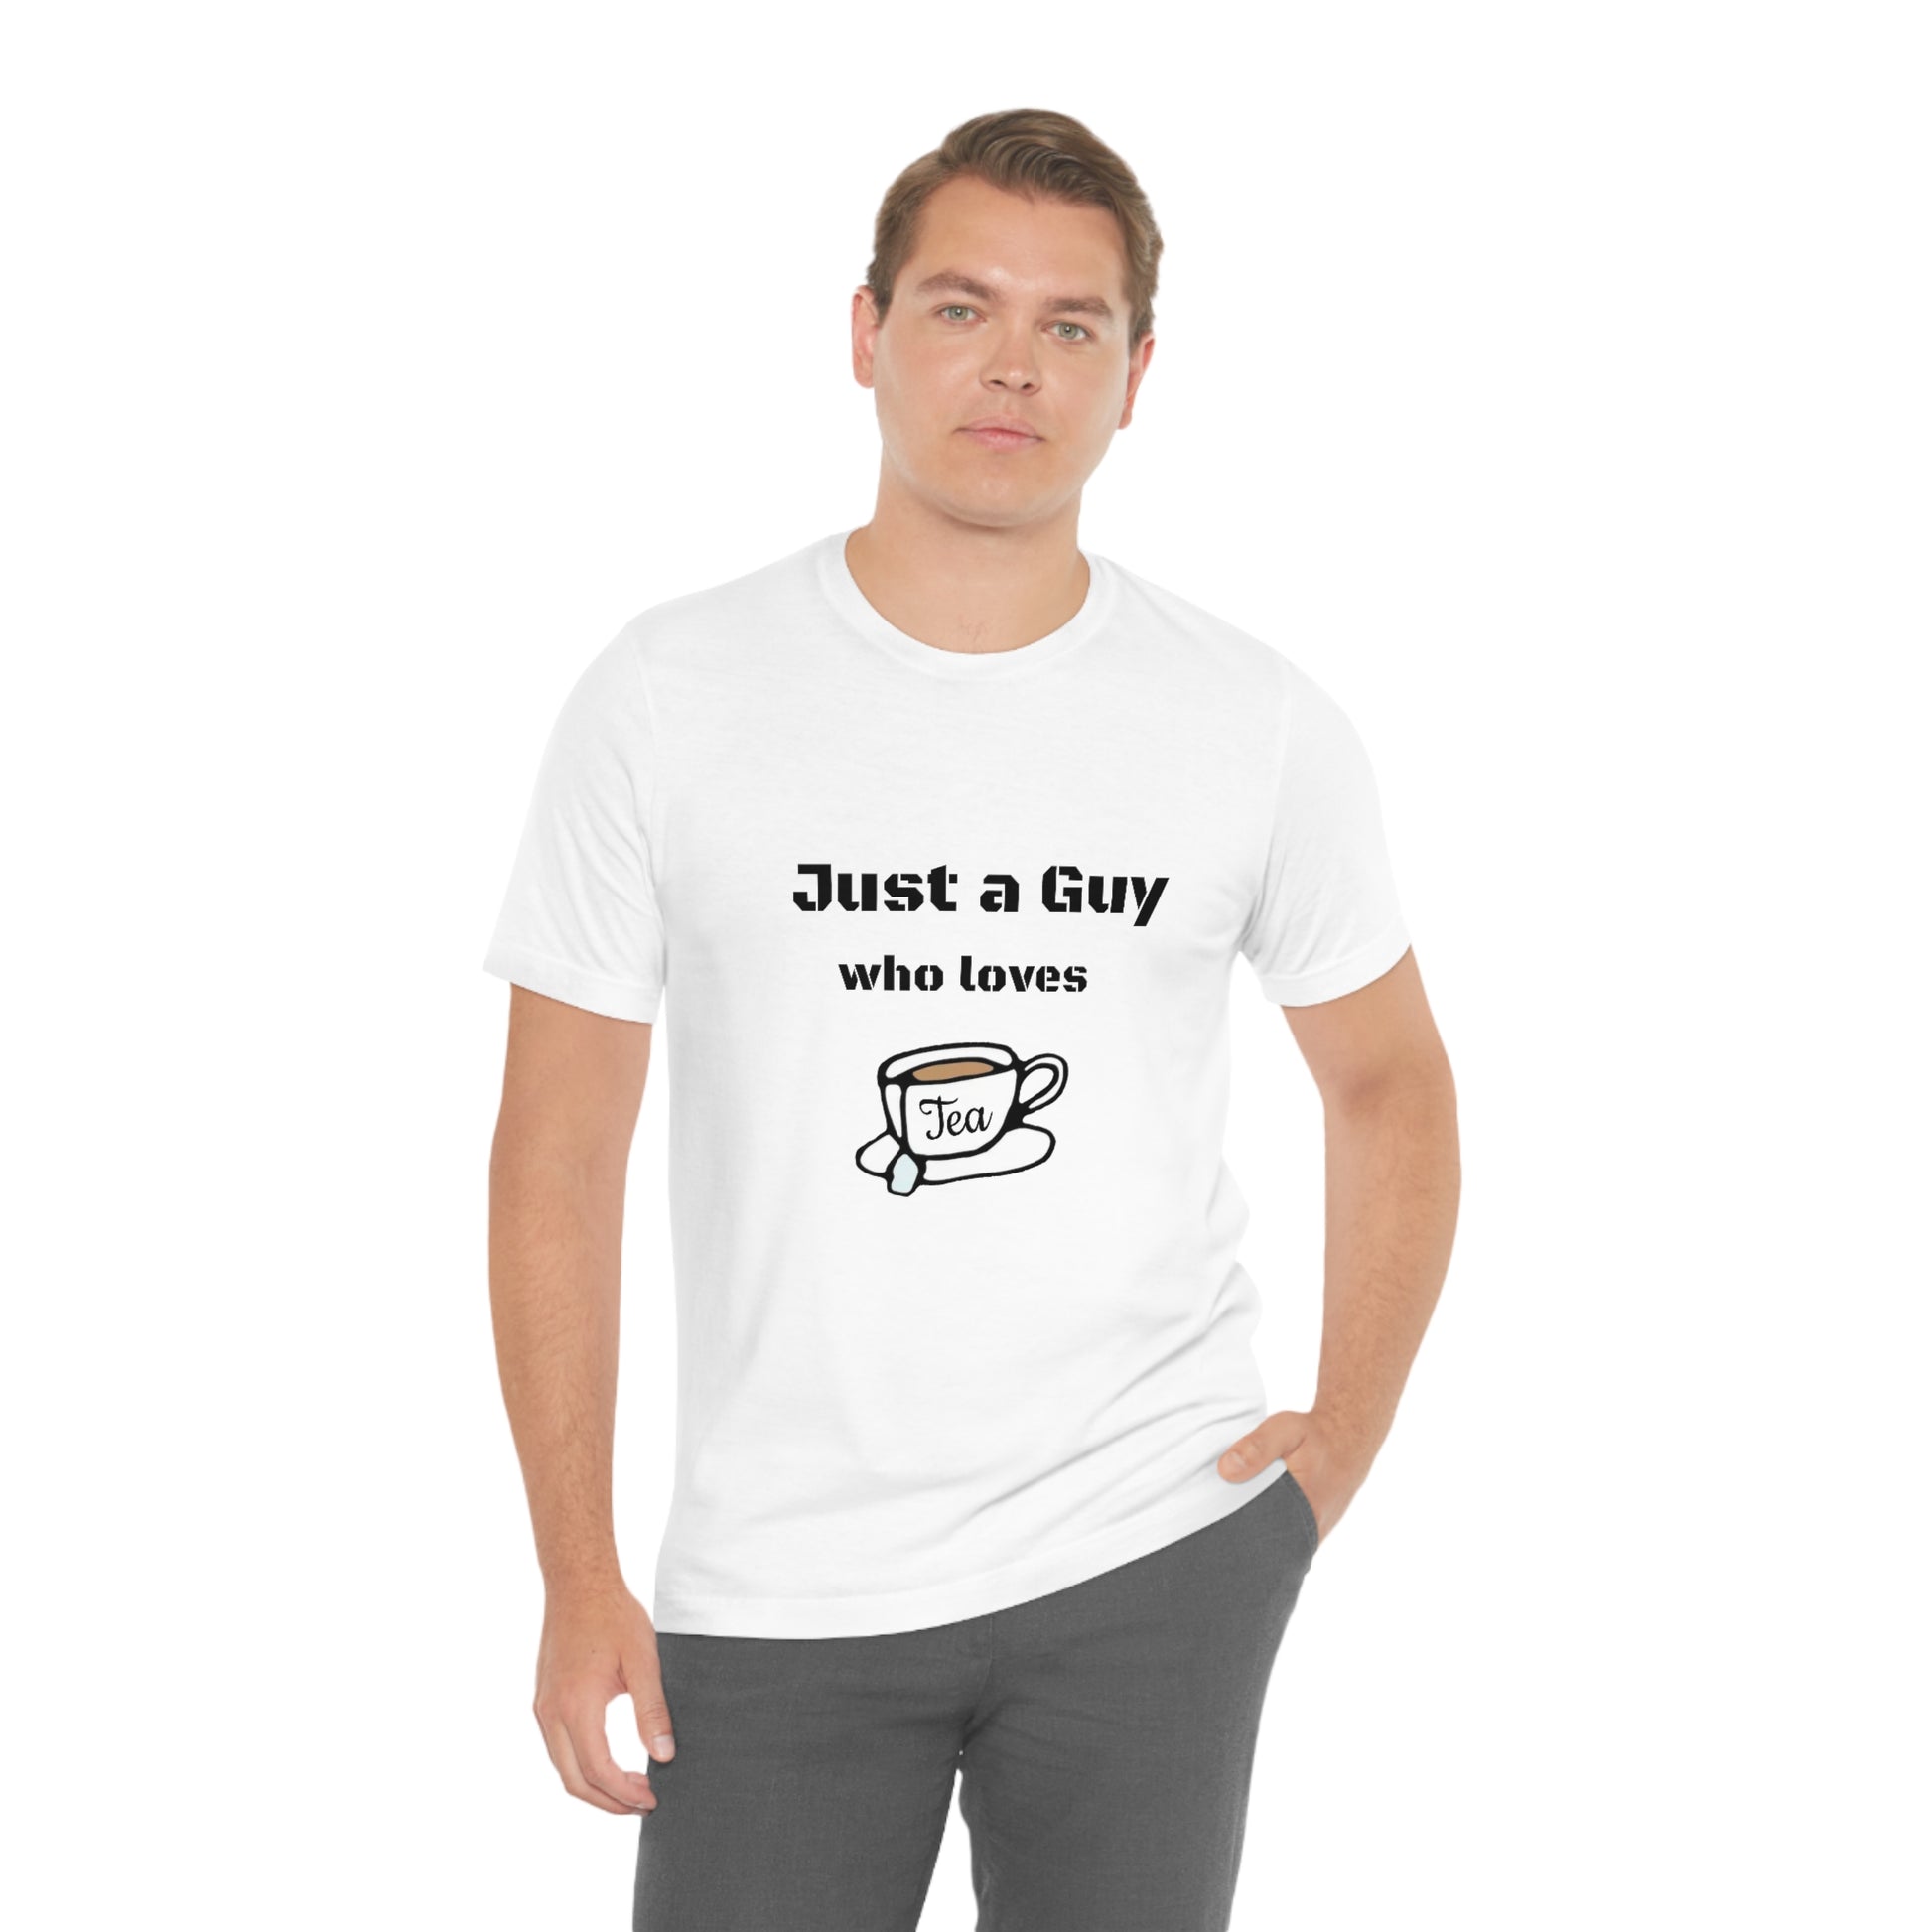 Just a guy who loves Tea - Funny Designed - Unisex Short Sleeve Tee